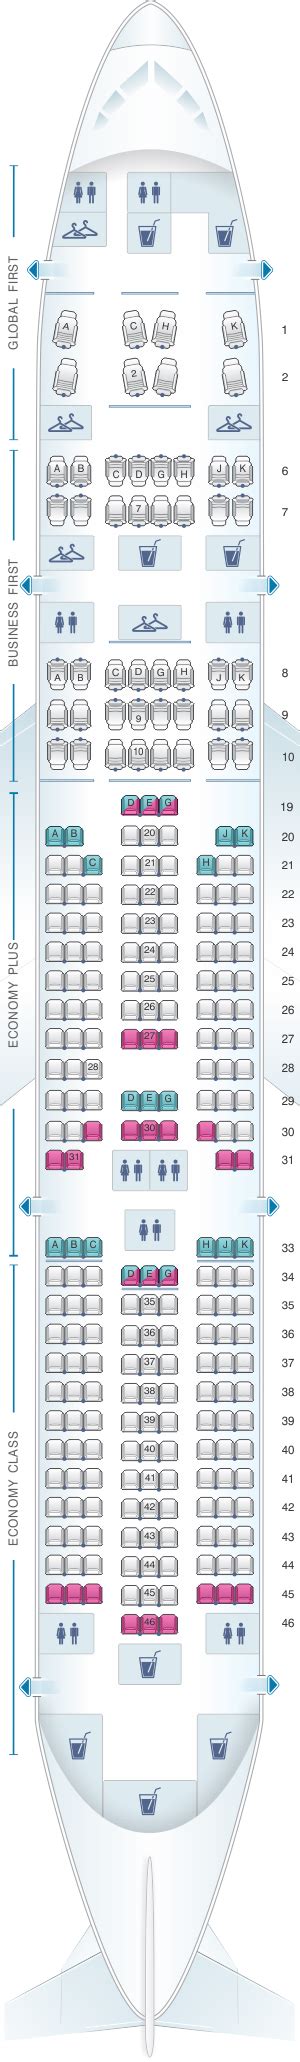 United 777 200 seat map. Detailed seat map United Airlines Boeing B777 200 (777) - version 1. Find the best airplanes seats, information on legroom, recline and in-flight entertainment using our detailed online seating charts. 